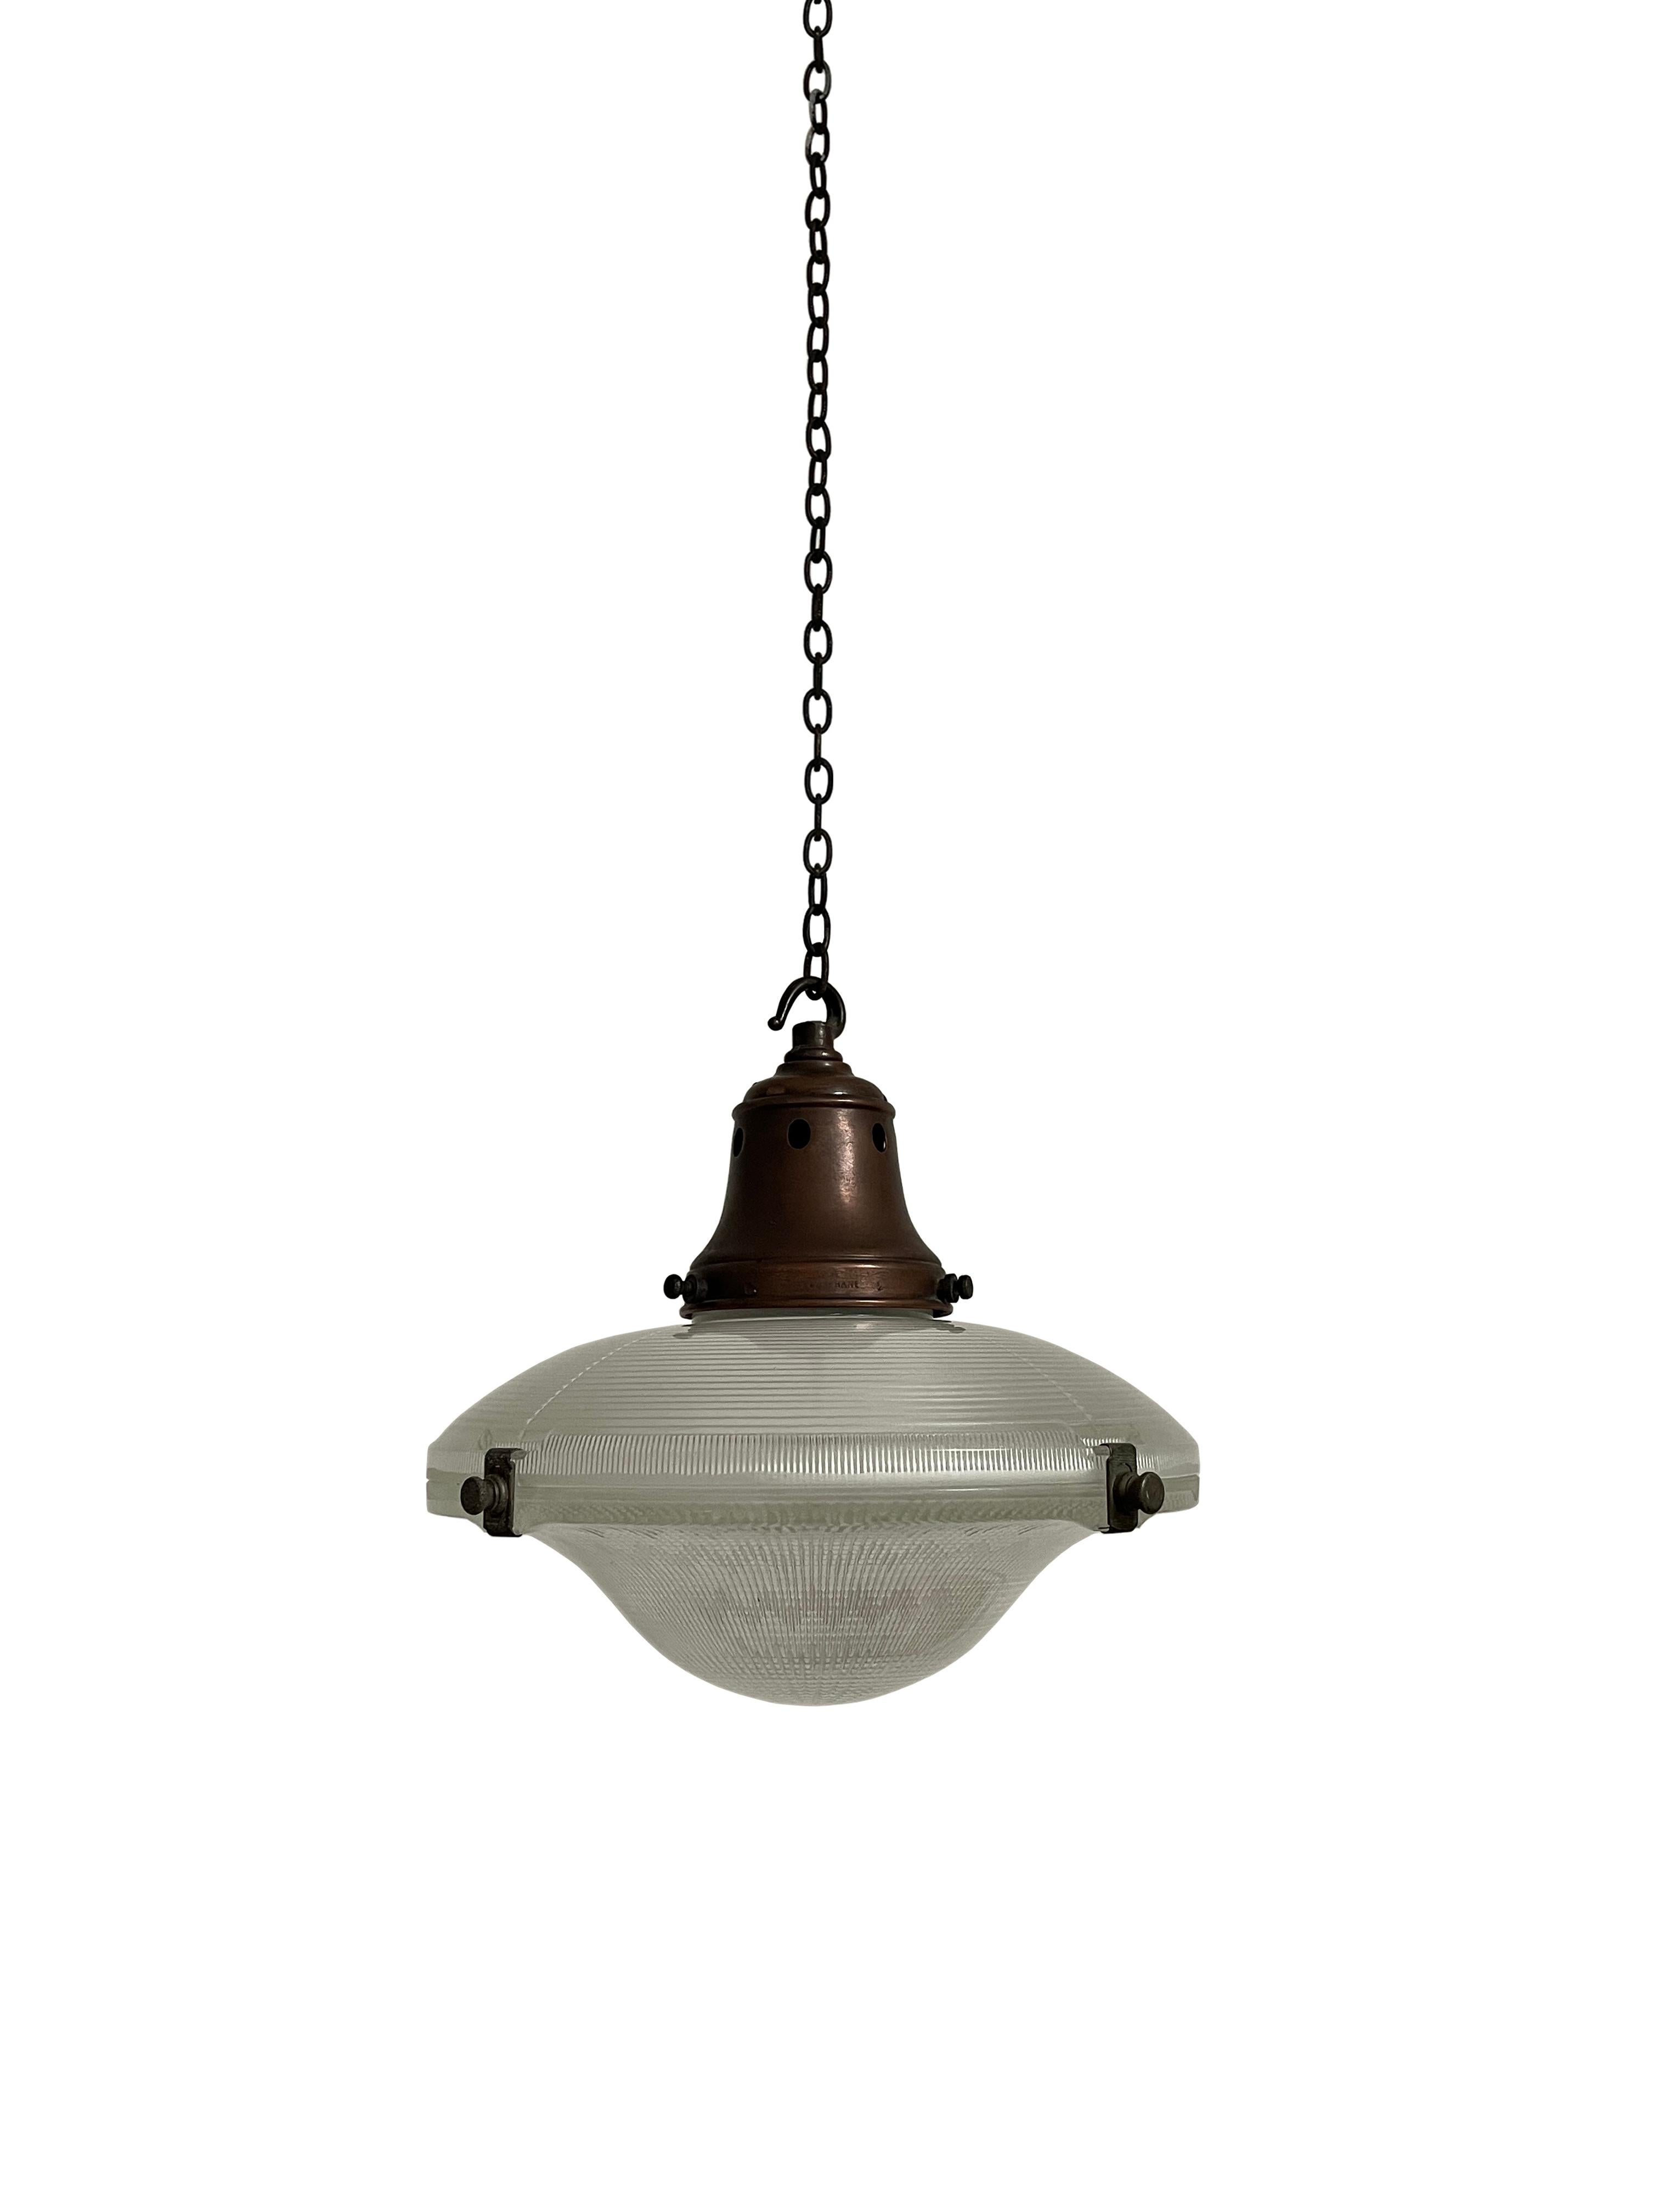 - A single 'Ripple-Lite' Holophane ceiling pendant with original stamped copper gallery, England circa 1910.
- The light comprises of two prismatic glass saucers held together by their original Holophane clips, across the upper section aged hooked